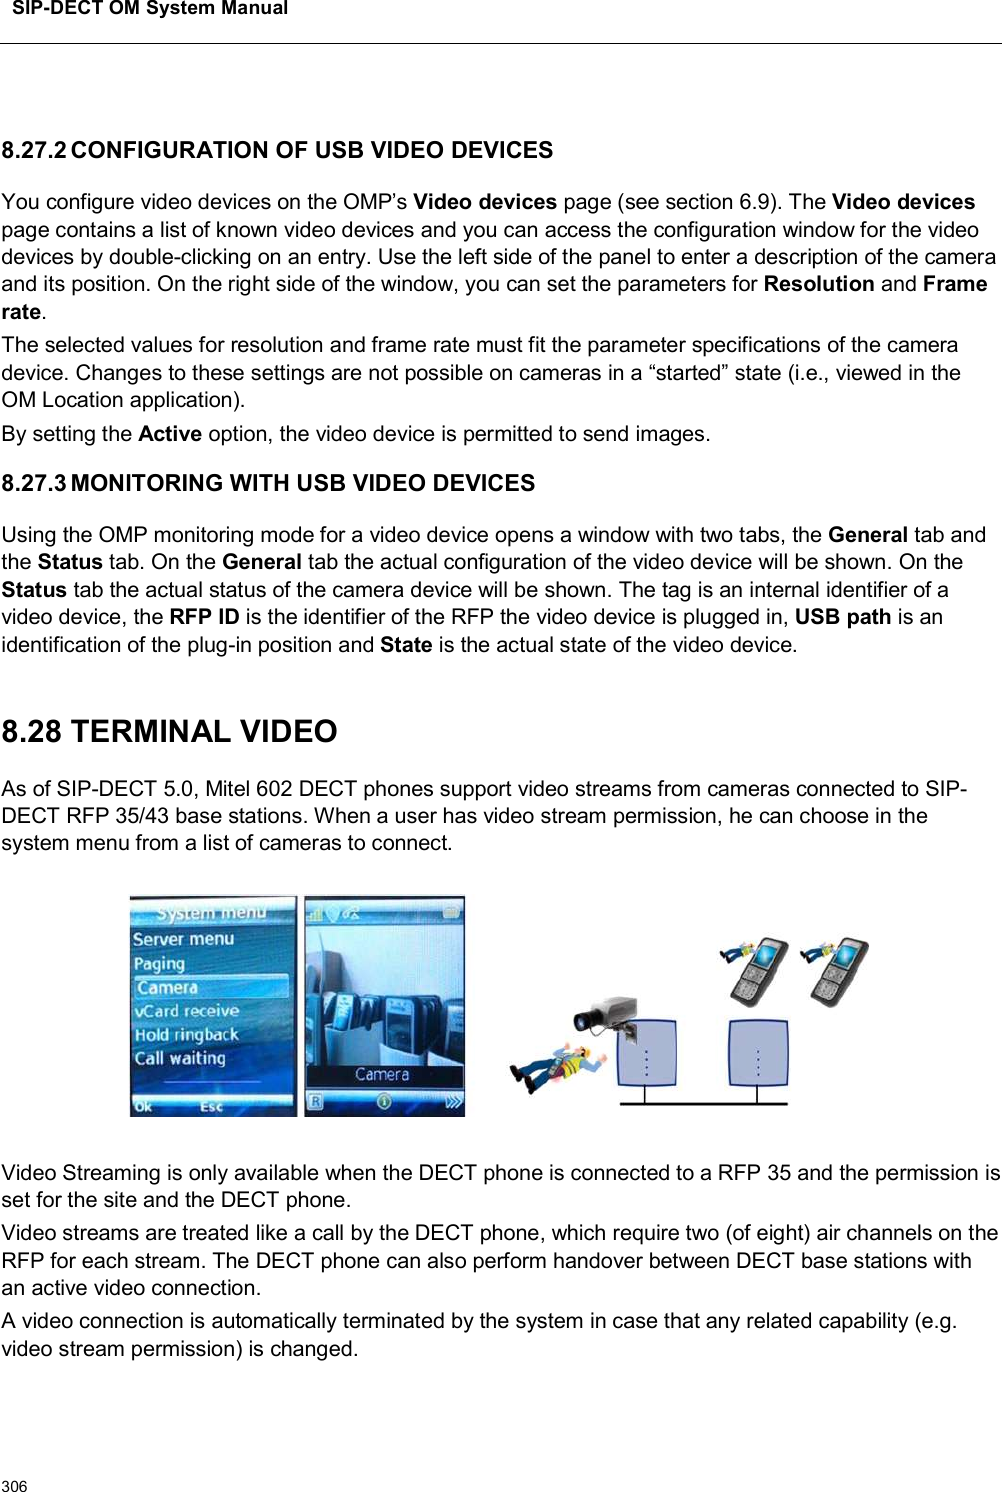 SIP-DECT OM System Manual3068.27.2 CONFIGURATION OF USB VIDEO DEVICESYou configure video devices on the OMP’s Video devices page (see section 6.9). The Video devicespage contains a list of known video devices and you can access the configuration window for the video devices by double-clicking on an entry. Use the left side of the panel to enter a description of the camera and its position. On the right side of the window, you can set the parameters for Resolution and Frame rate.The selected values for resolution and frame rate must fit the parameter specifications of the camera device. Changes to these settings are not possible on cameras in a “started” state (i.e., viewed in the OM Location application). By setting the Active option, the video device is permitted to send images.8.27.3 MONITORING WITH USB VIDEO DEVICESUsing the OMP monitoring mode for a video device opens a window with two tabs, the General tab and the Status tab. On the General tab the actual configuration of the video device will be shown. On the Status tab the actual status of the camera device will be shown. The tag is an internal identifier of a video device, the RFP ID is the identifier of the RFP the video device is plugged in, USB path is an identification of the plug-in position and State is the actual state of the video device.8.28 TERMINAL VIDEOAs of SIP-DECT 5.0, Mitel 602 DECT phones support video streams from cameras connected to SIP-DECT RFP 35/43 base stations. When a user has video stream permission, he can choose in the system menu from a list of cameras to connect.Video Streaming is only available when the DECT phone is connected to a RFP 35 and the permission is set for the site and the DECT phone.Video streams are treated like a call by the DECT phone, which require two (of eight) air channels on the RFP for each stream. The DECT phone can also perform handover between DECT base stations with an active video connection.A video connection is automatically terminated by the system in case that any related capability (e.g. video stream permission) is changed.